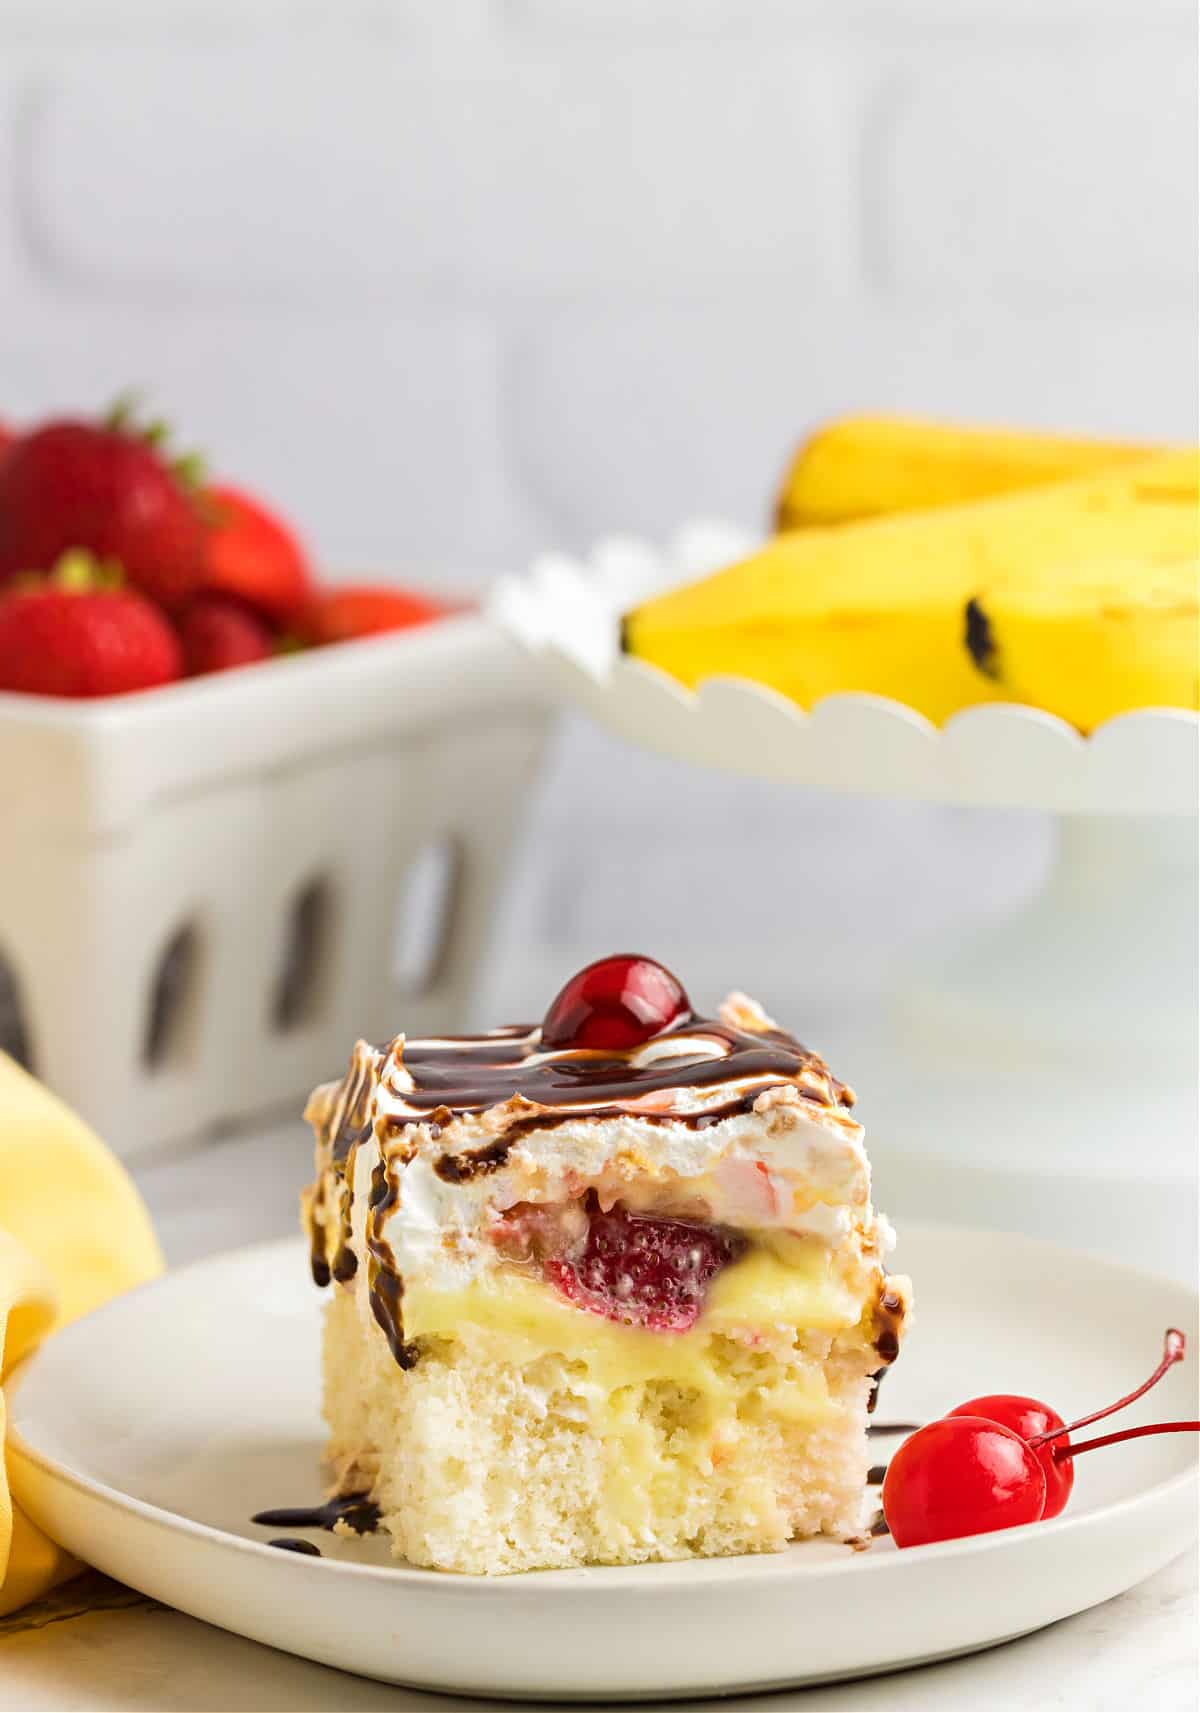 Slice of cake with bananas, strawberries, and pineapple on a white plate.